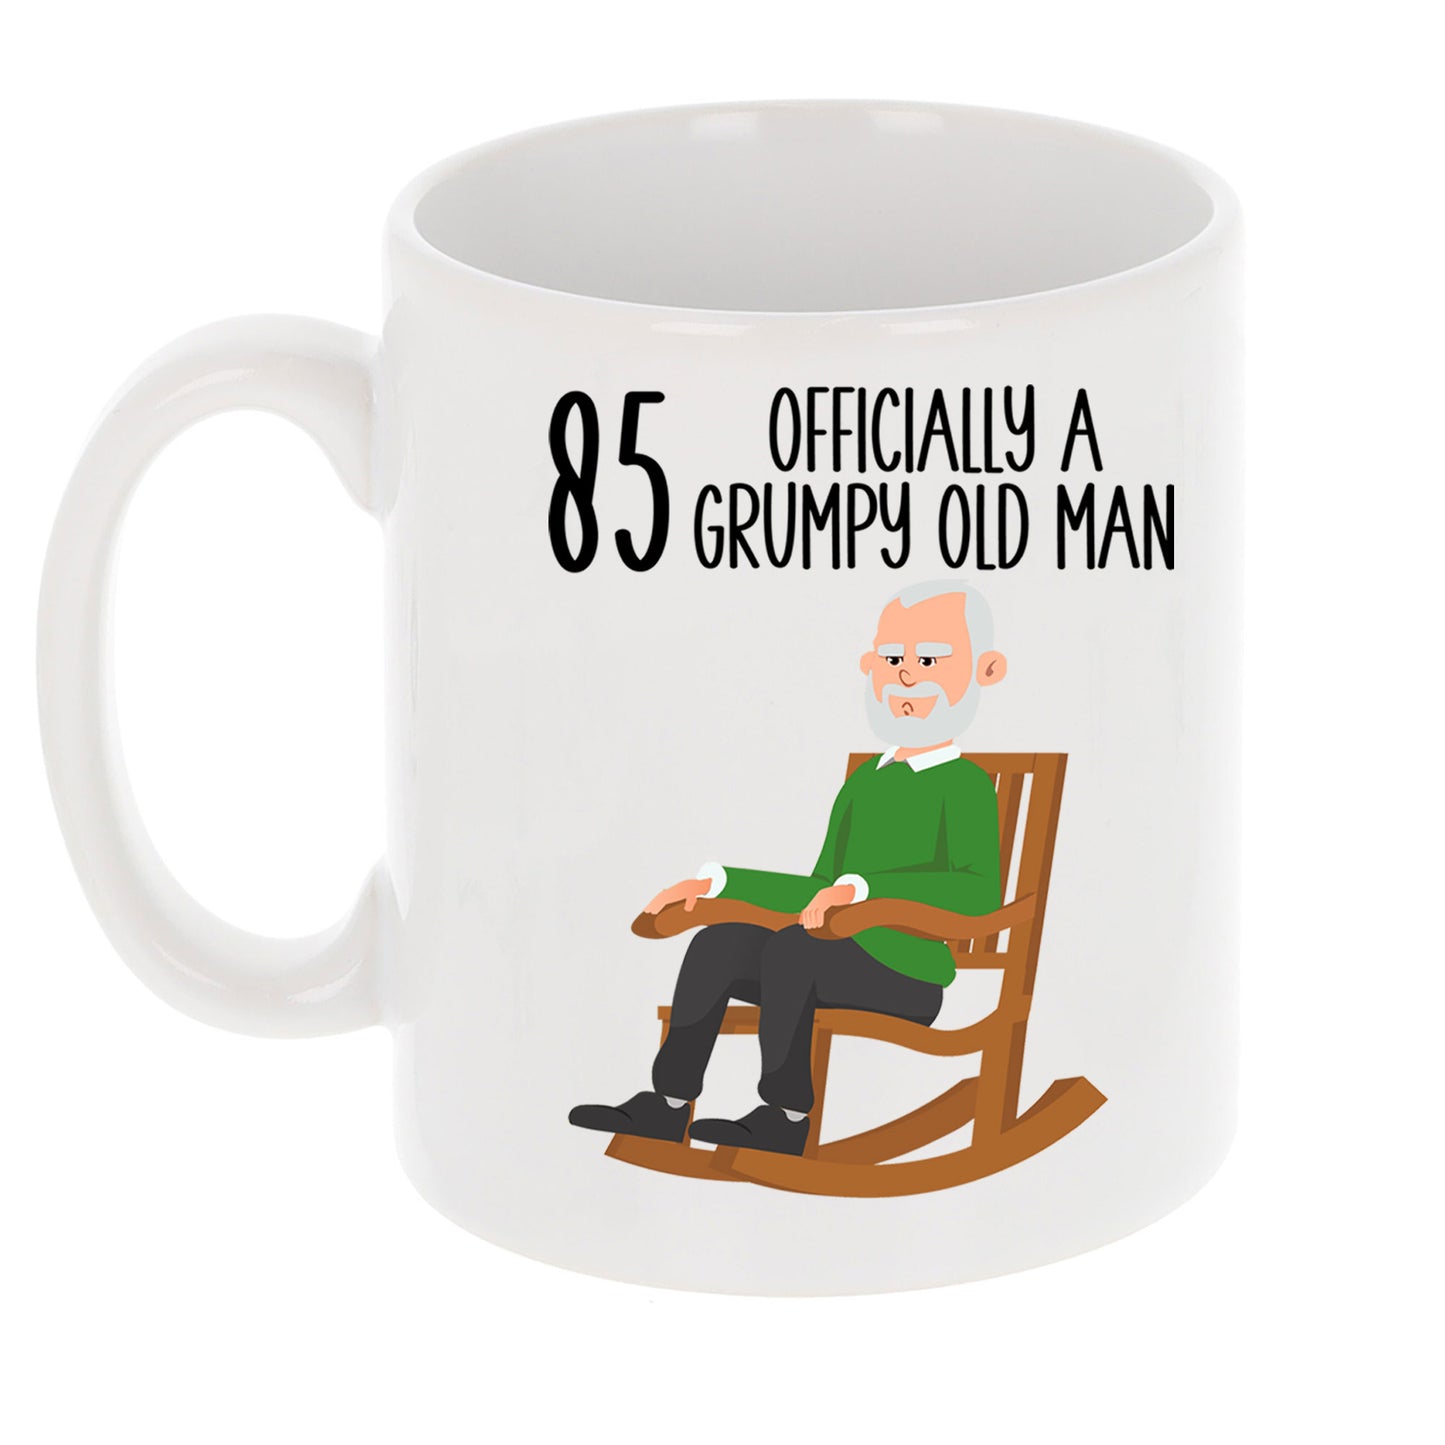 85 Officially A Grumpy Old Man Mug and/or Coaster Gift  - Always Looking Good - Mug On Its Own  